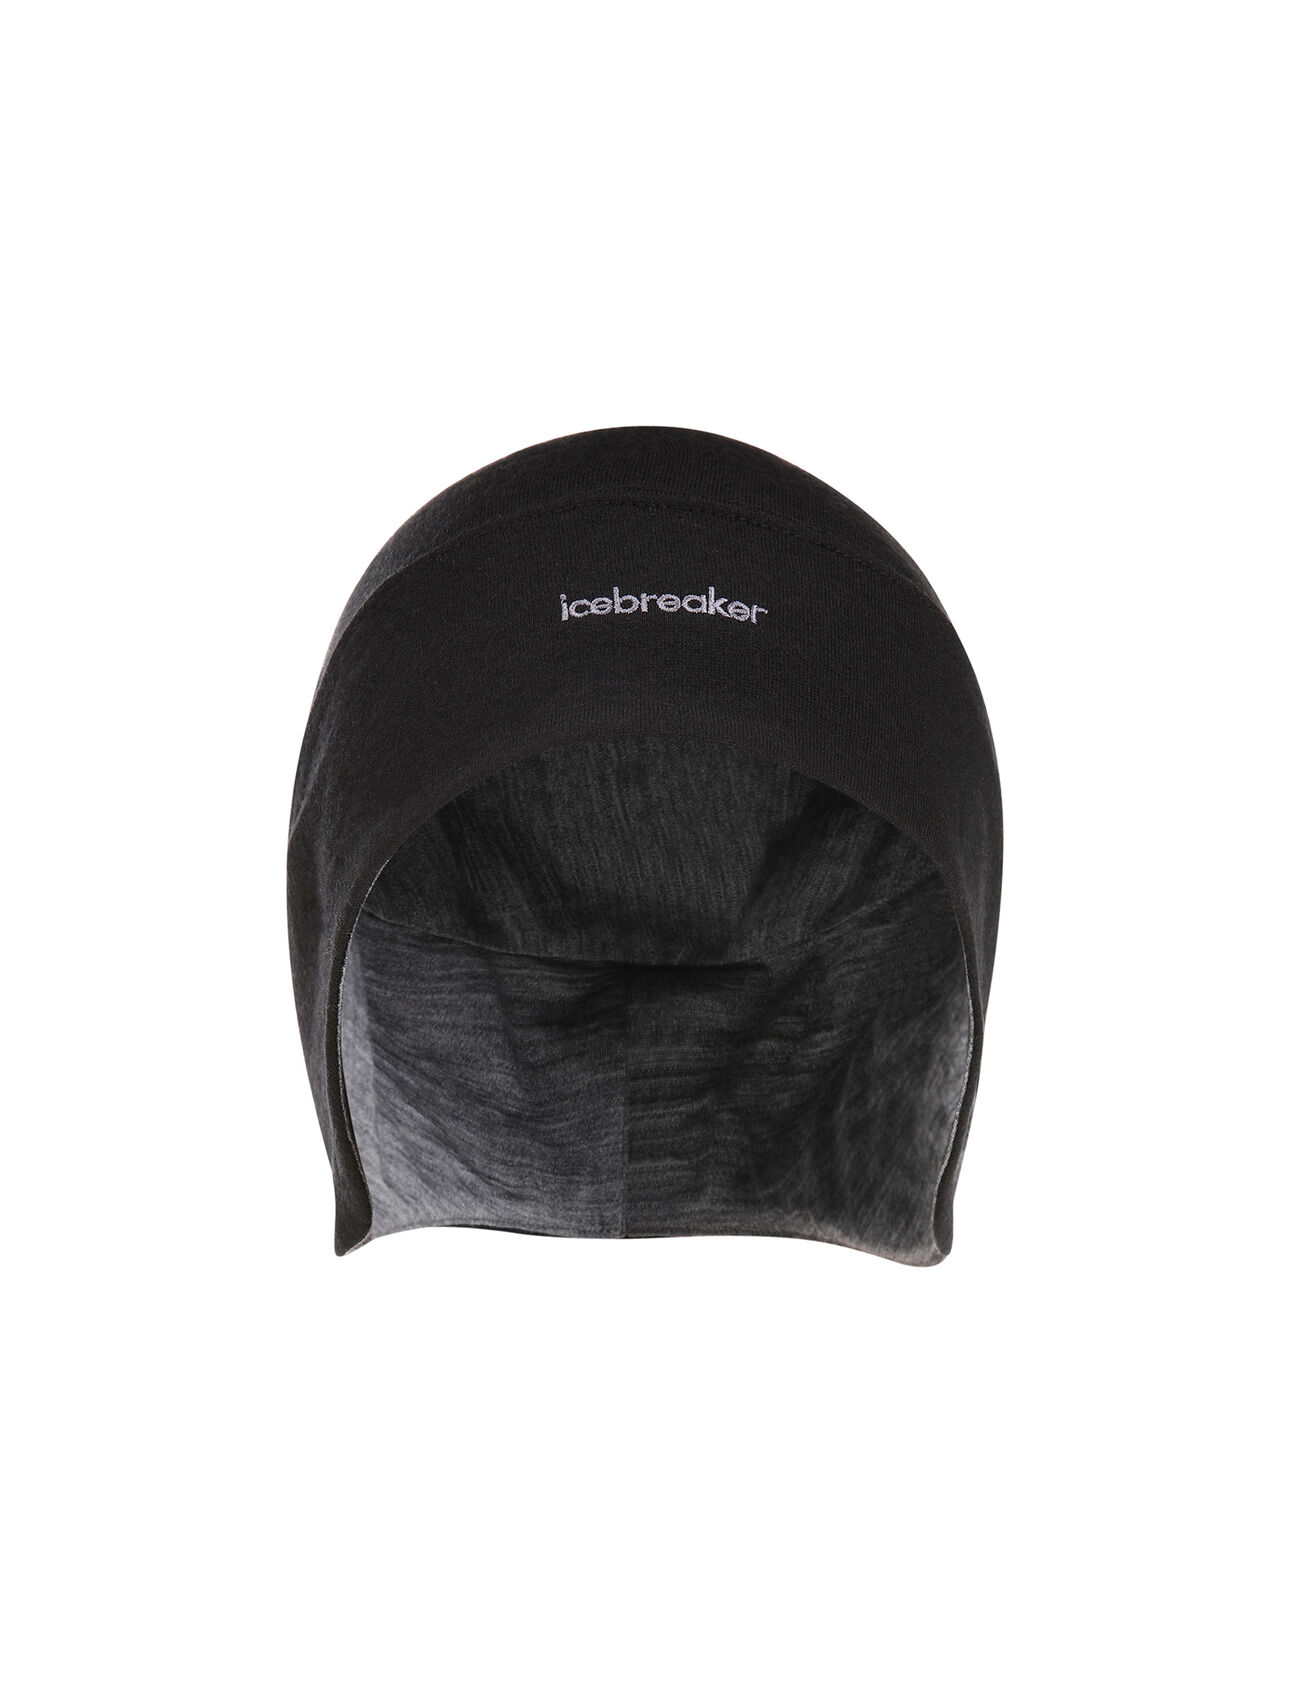 Unisex Merino Quantum Beanie The hat of choice for extra-cold days from the ski slopes to the city streets, the Quantum Beanie features fully lined merino terry fabric with ear flaps for added warmth and protection.